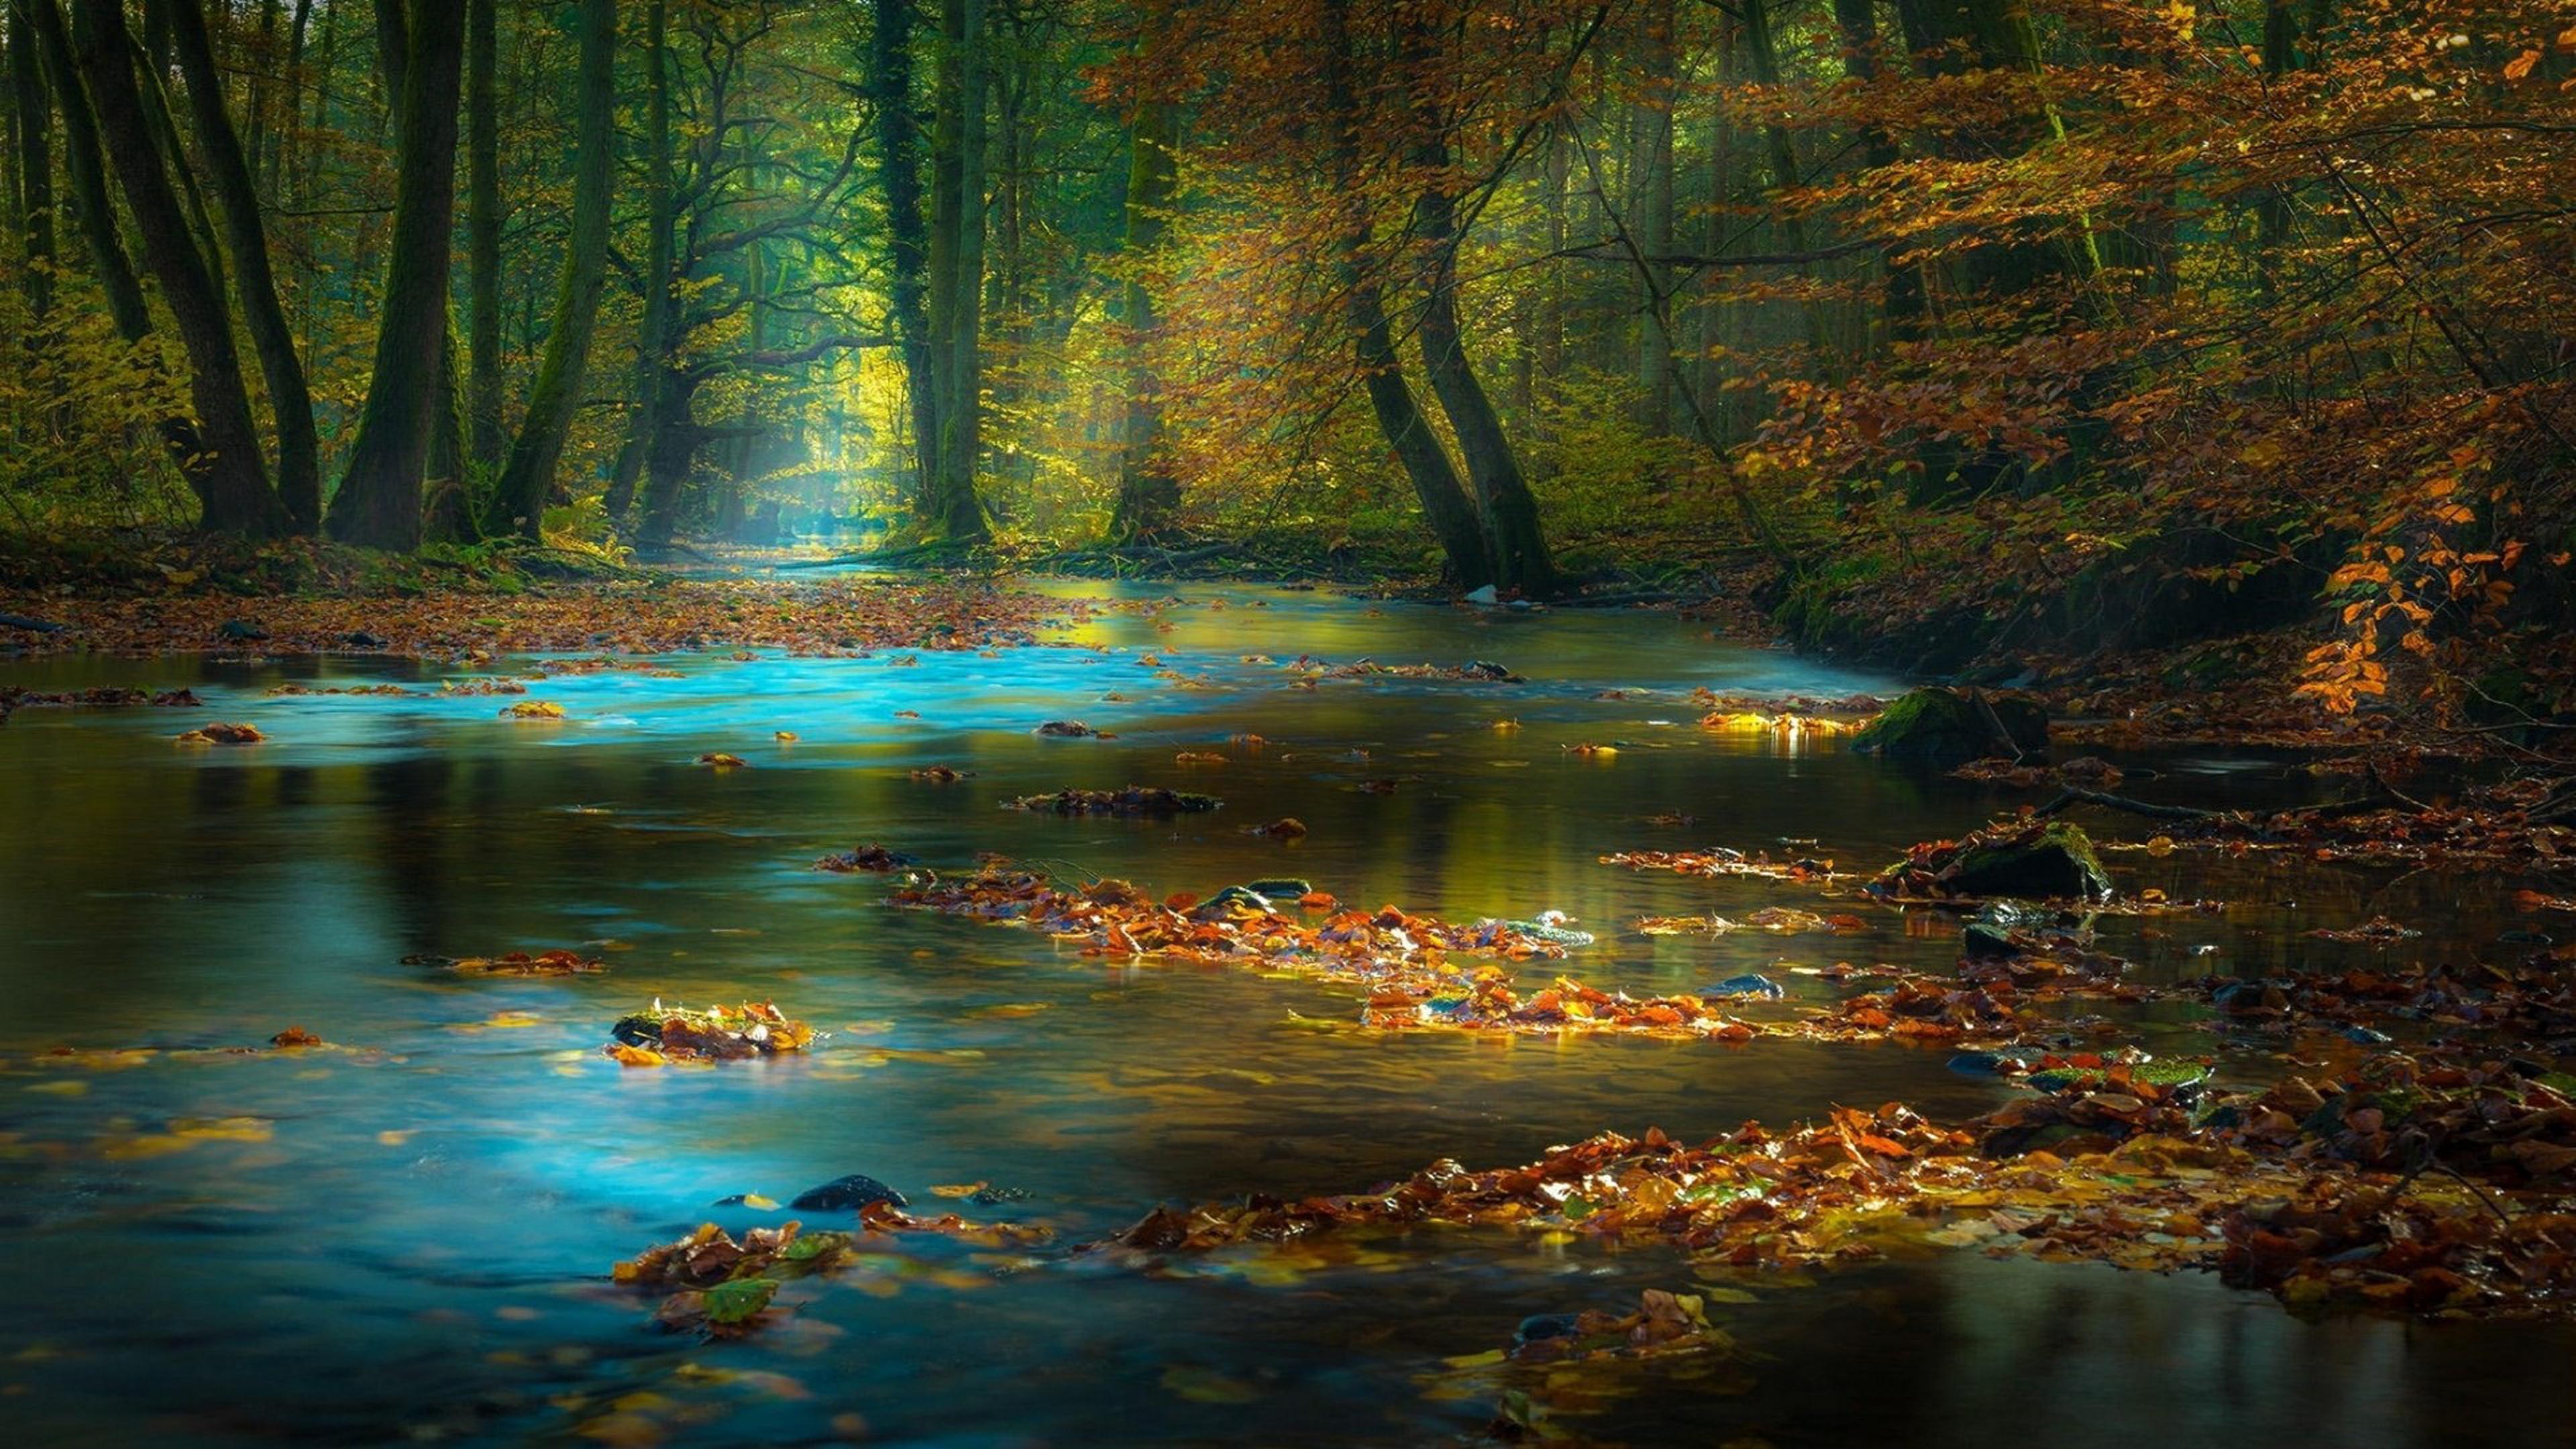 Autumn Landscape Forest Trees Mountain Stream River Fall Leaf And Yellow Leaves Spessart Mountain Range In Bavaria Germany Wallpaper HD 3840x2160, Wallpaper13.com